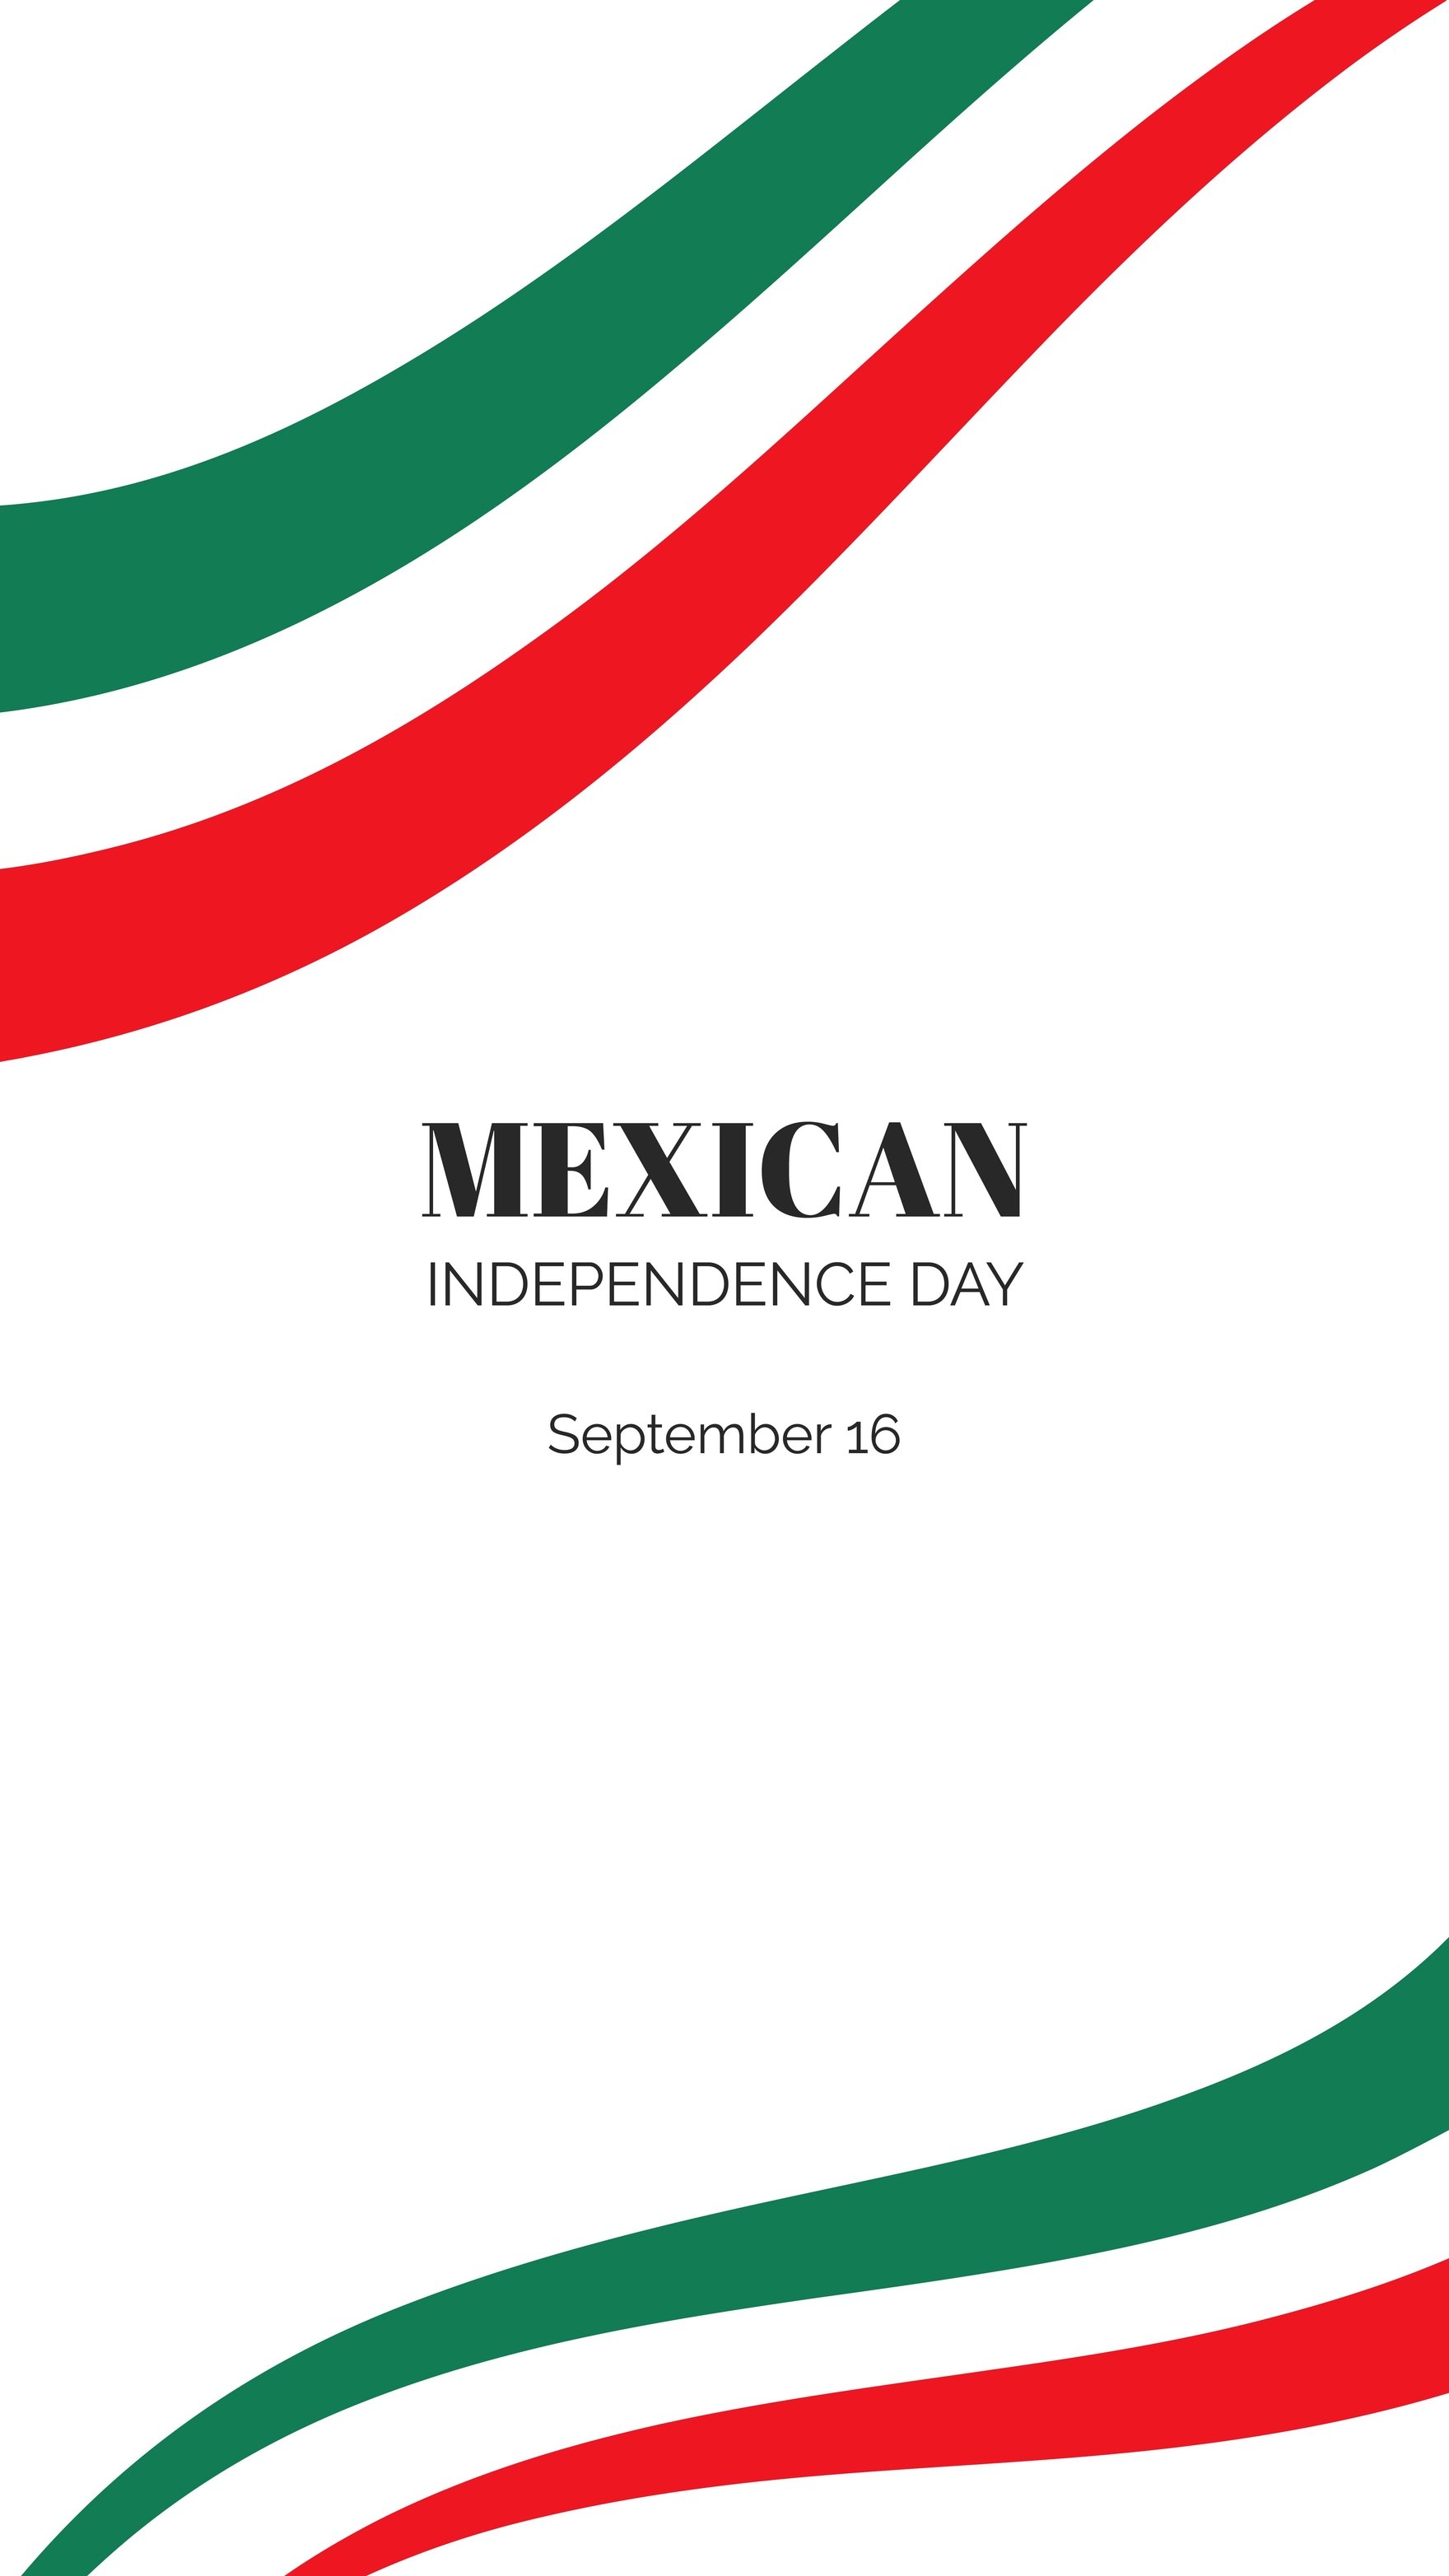 Mexican Independence Day Instragram Story in Illustrator, PSD, EPS, SVG, JPG, PNG